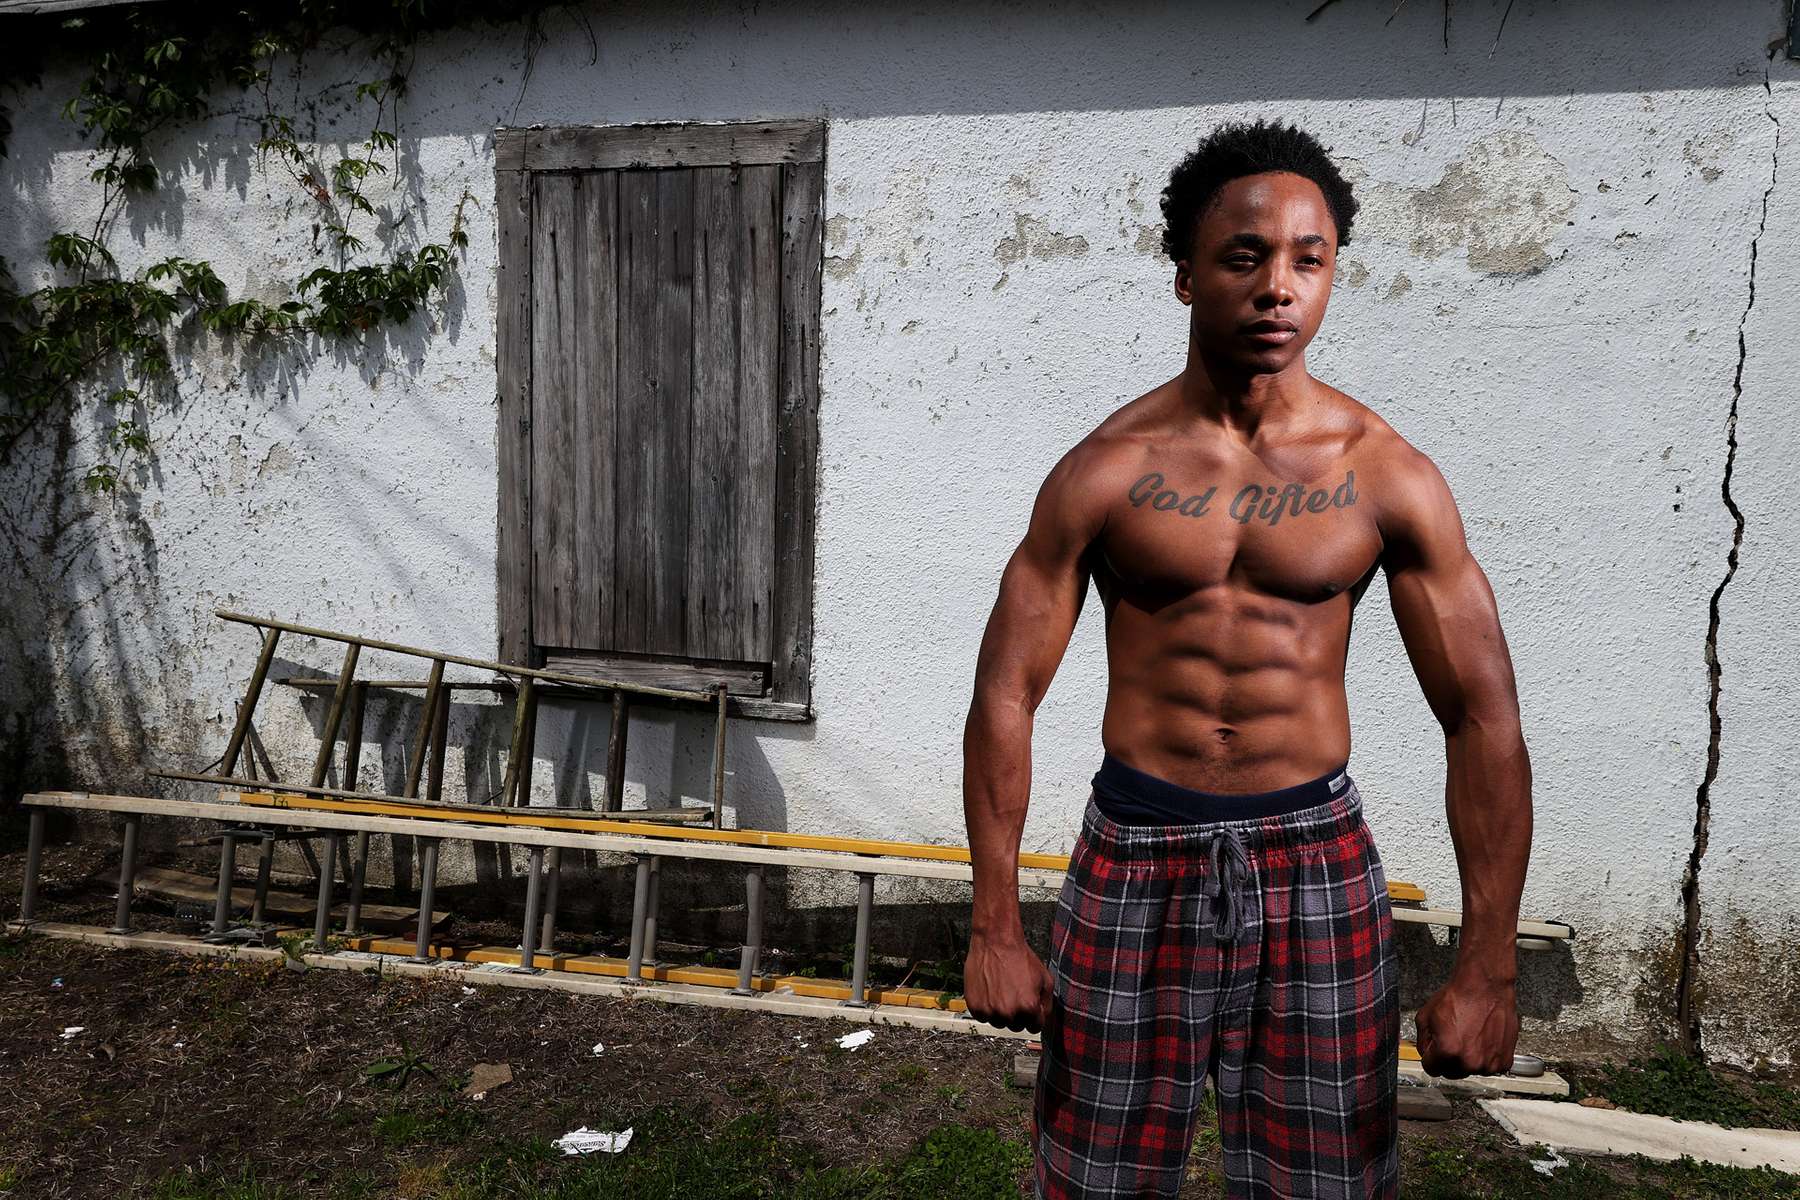 Alan Teemer Jr. poses for a portrait in his backyard on May 18, 2020 in Long Beach, New York.  Alan is an Amateur boxer who fought in the New York City Golden Gloves and made the Semi Finals in the Open 123lb class. He was training to compete in this year's Golden Gloves tournament but it has been cancelled due to the coronavirus pandemic.  The Gym he fights for is called the Freeport Boxing Club and has been closed by New York Governor Andrew Cuomo since March 16th due to the coronavirus COVID-19 pandemic.  Until the gyms are deemed safe to open he will continue to stay fit by training at home with the hope that he can box again later this year. (